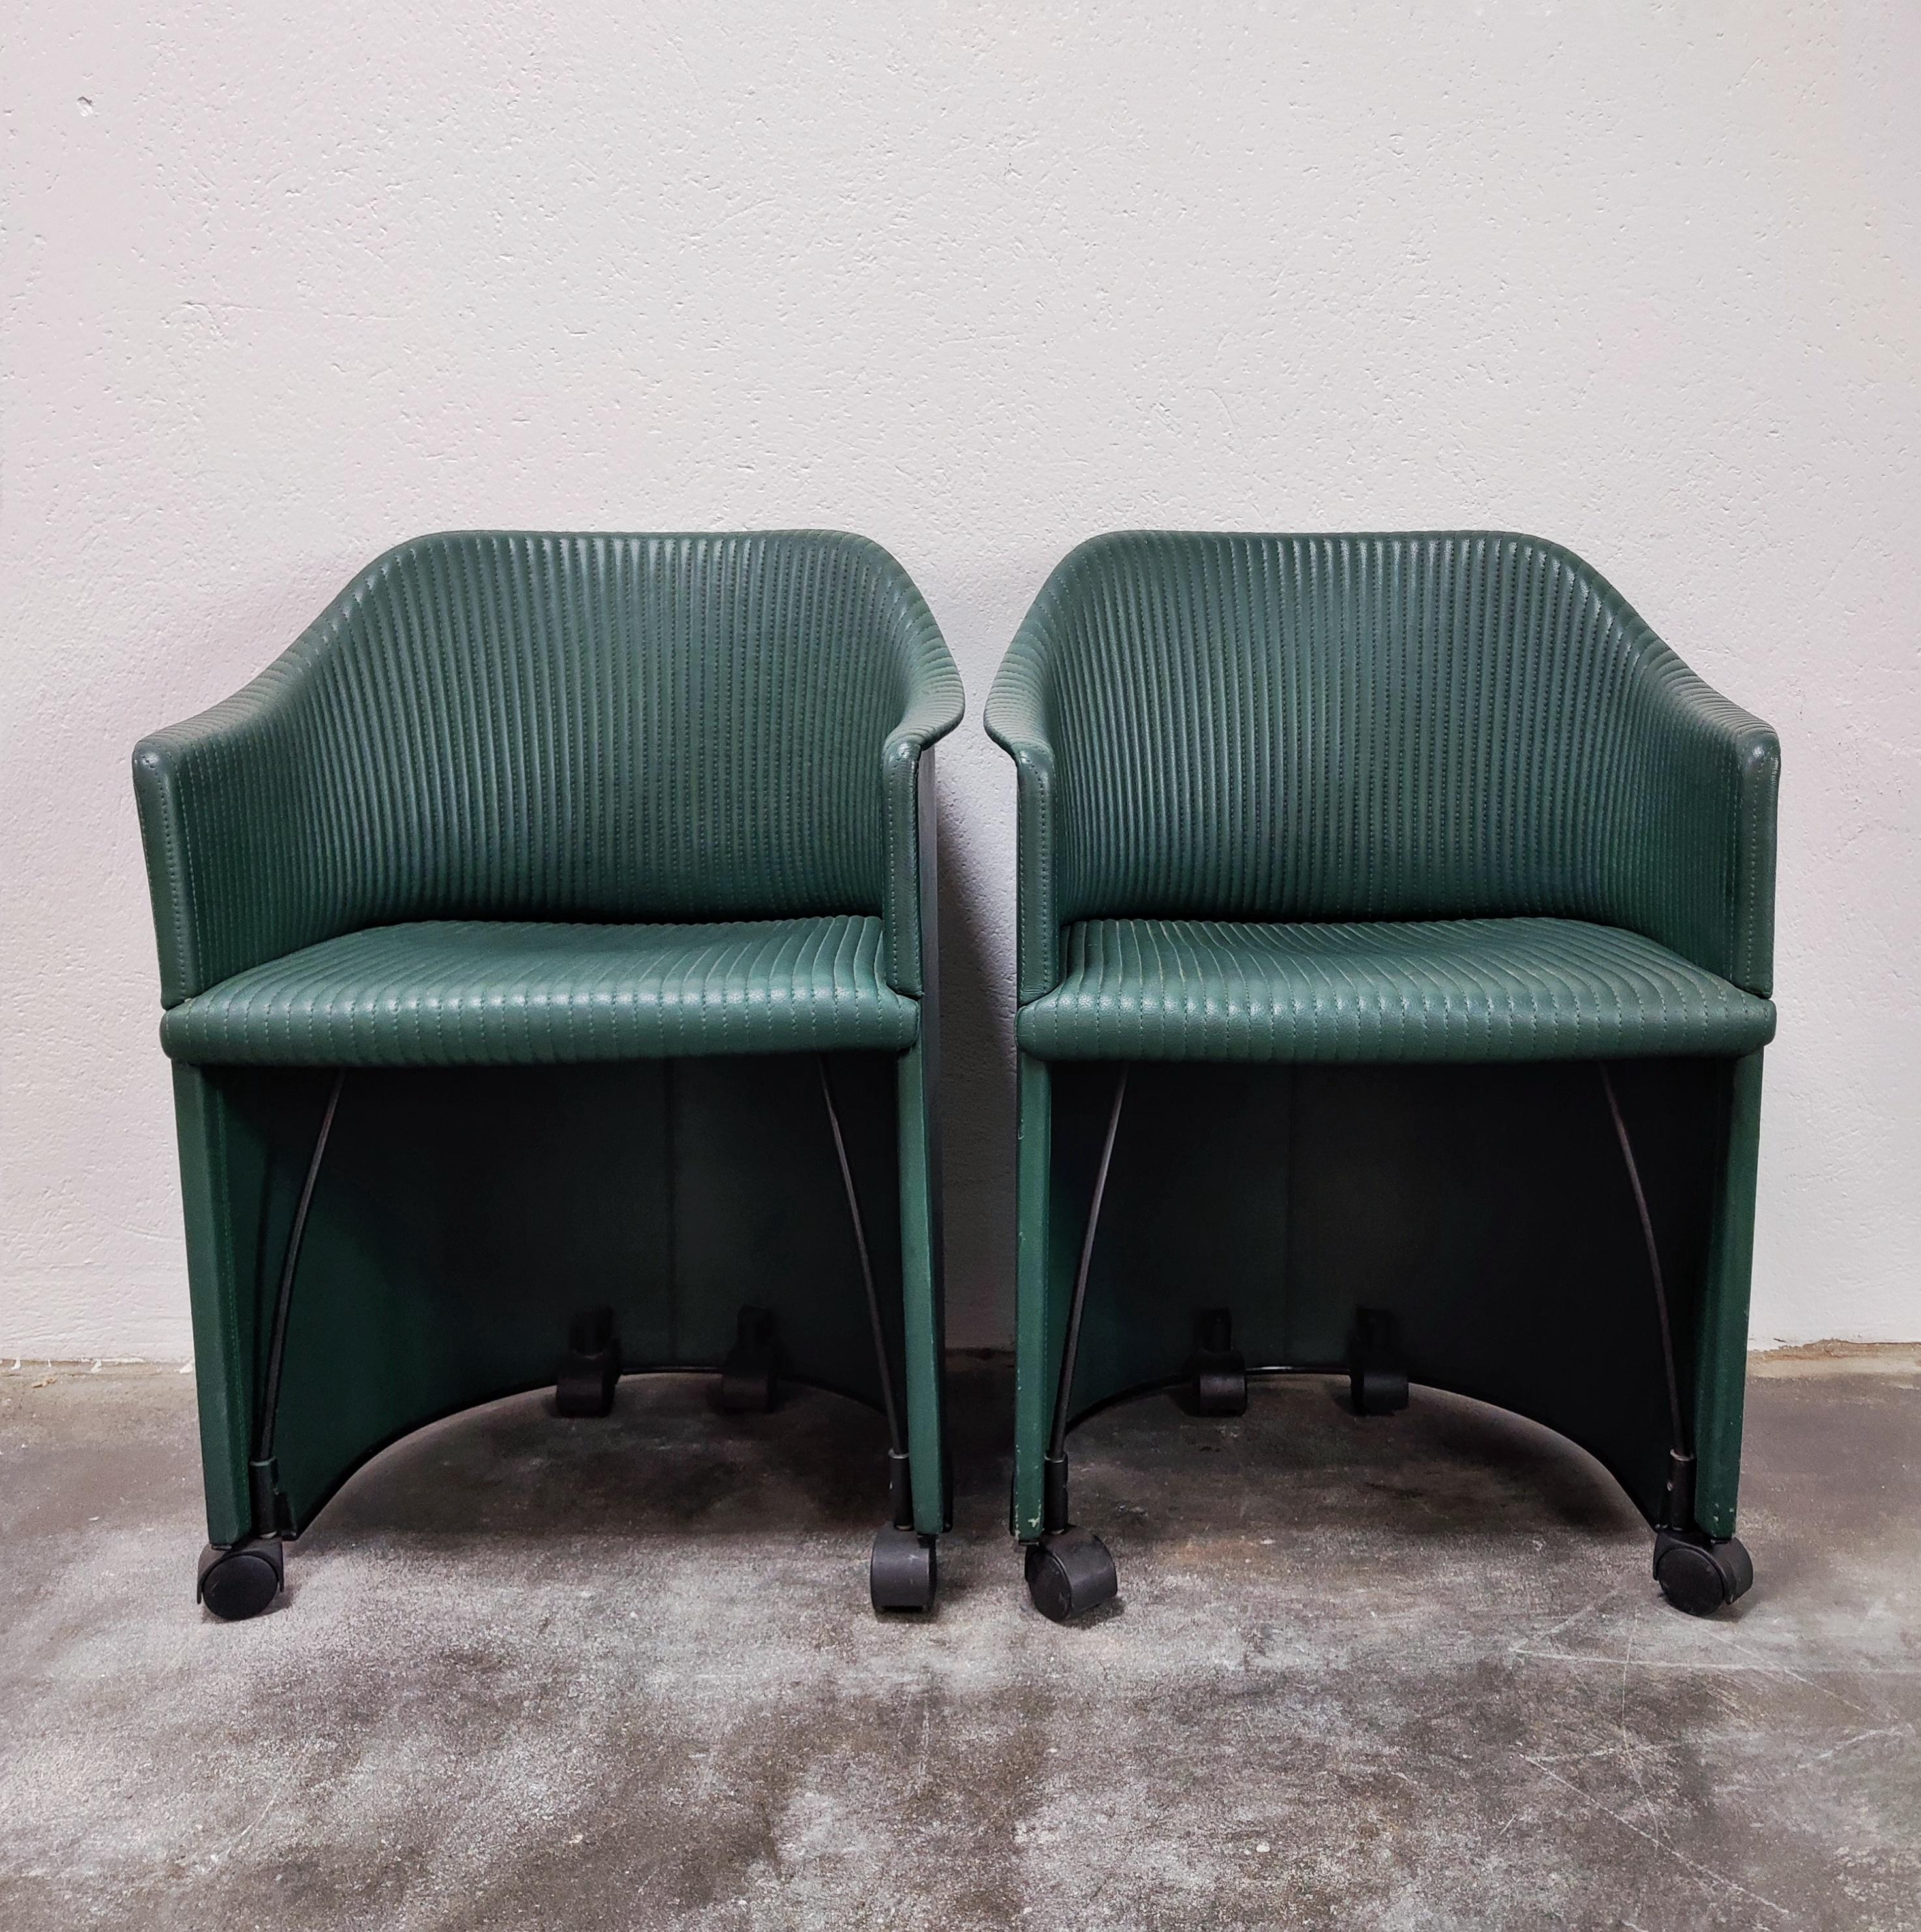 In this listing you will find a pair of very rare leather armchairs designed by Italian duo Afra and Tobia Scarpa. The armchairs were manufactured by Maxalto as a part of their Artona Collection in the mid 80s, and is known as Model 8552. They